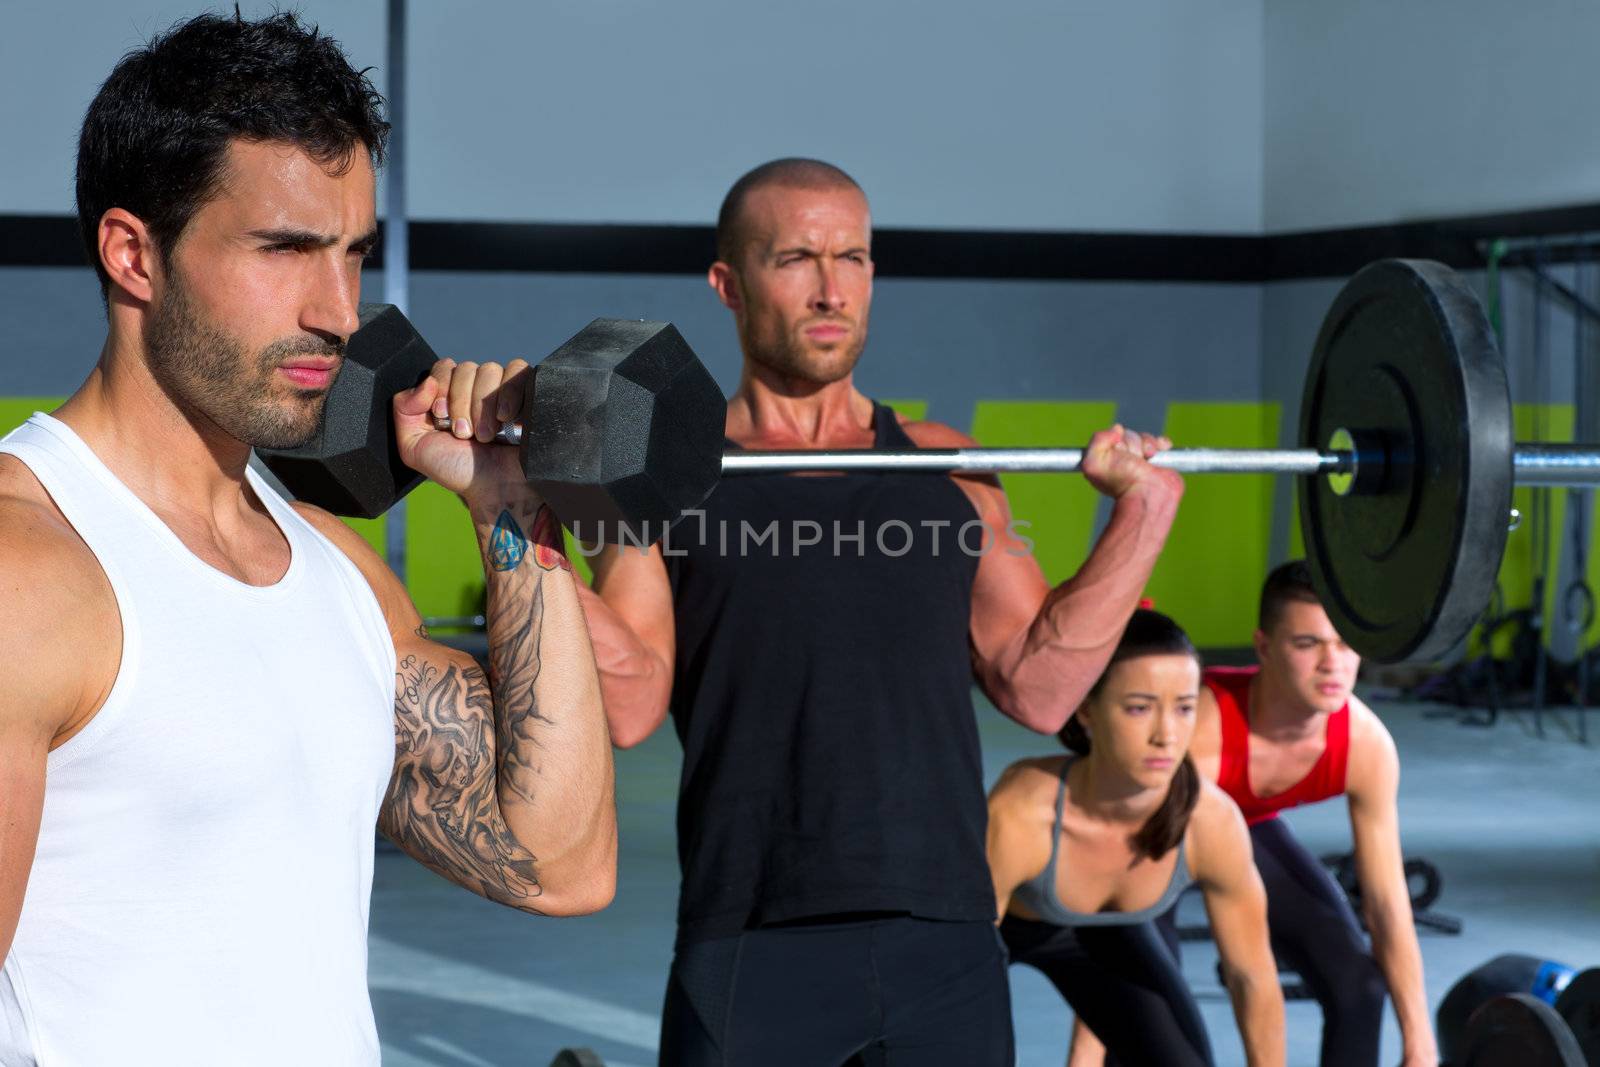 gym group with weight lifting bar crossfit workout by lunamarina